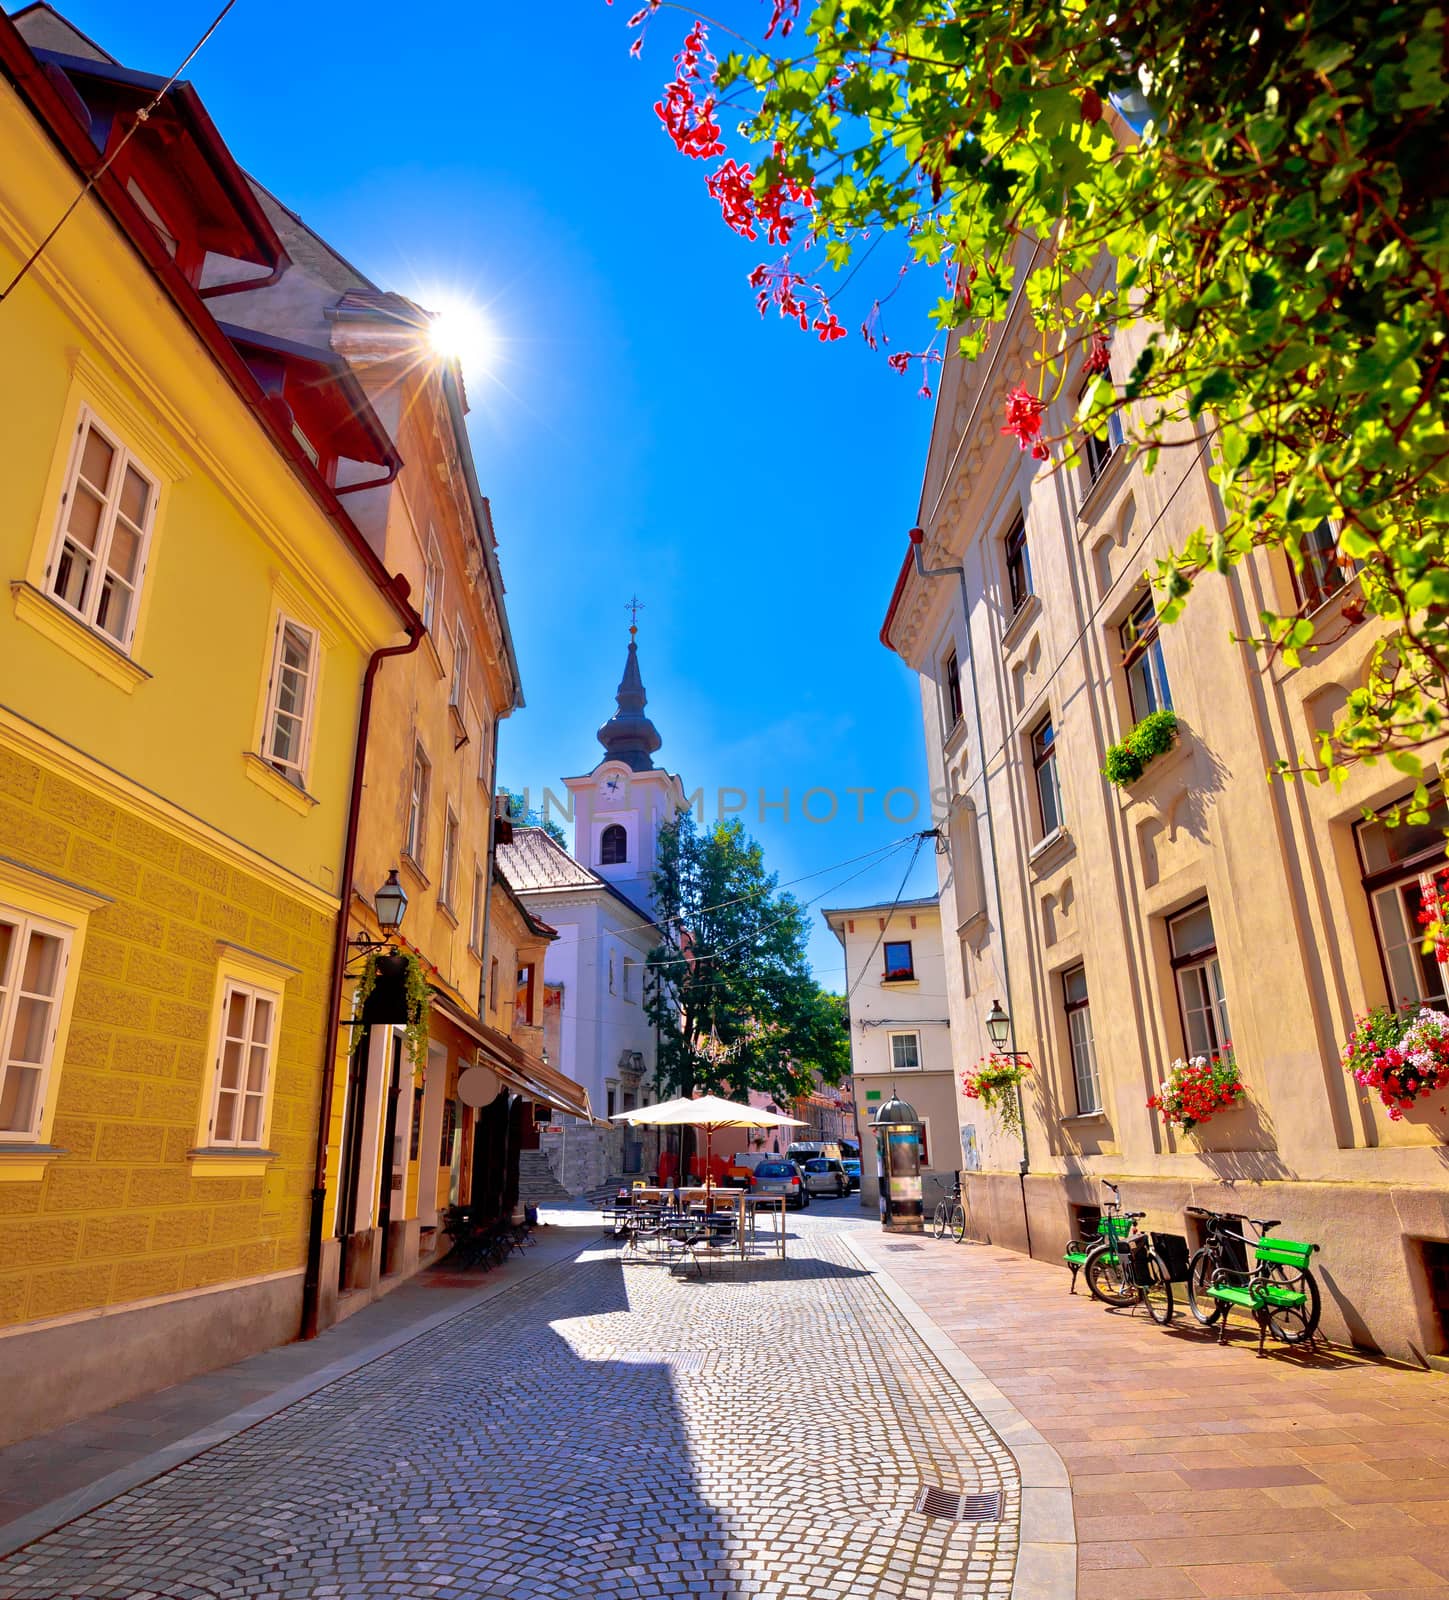 Cobbled old street and church of Ljubljana vertical view by xbrchx